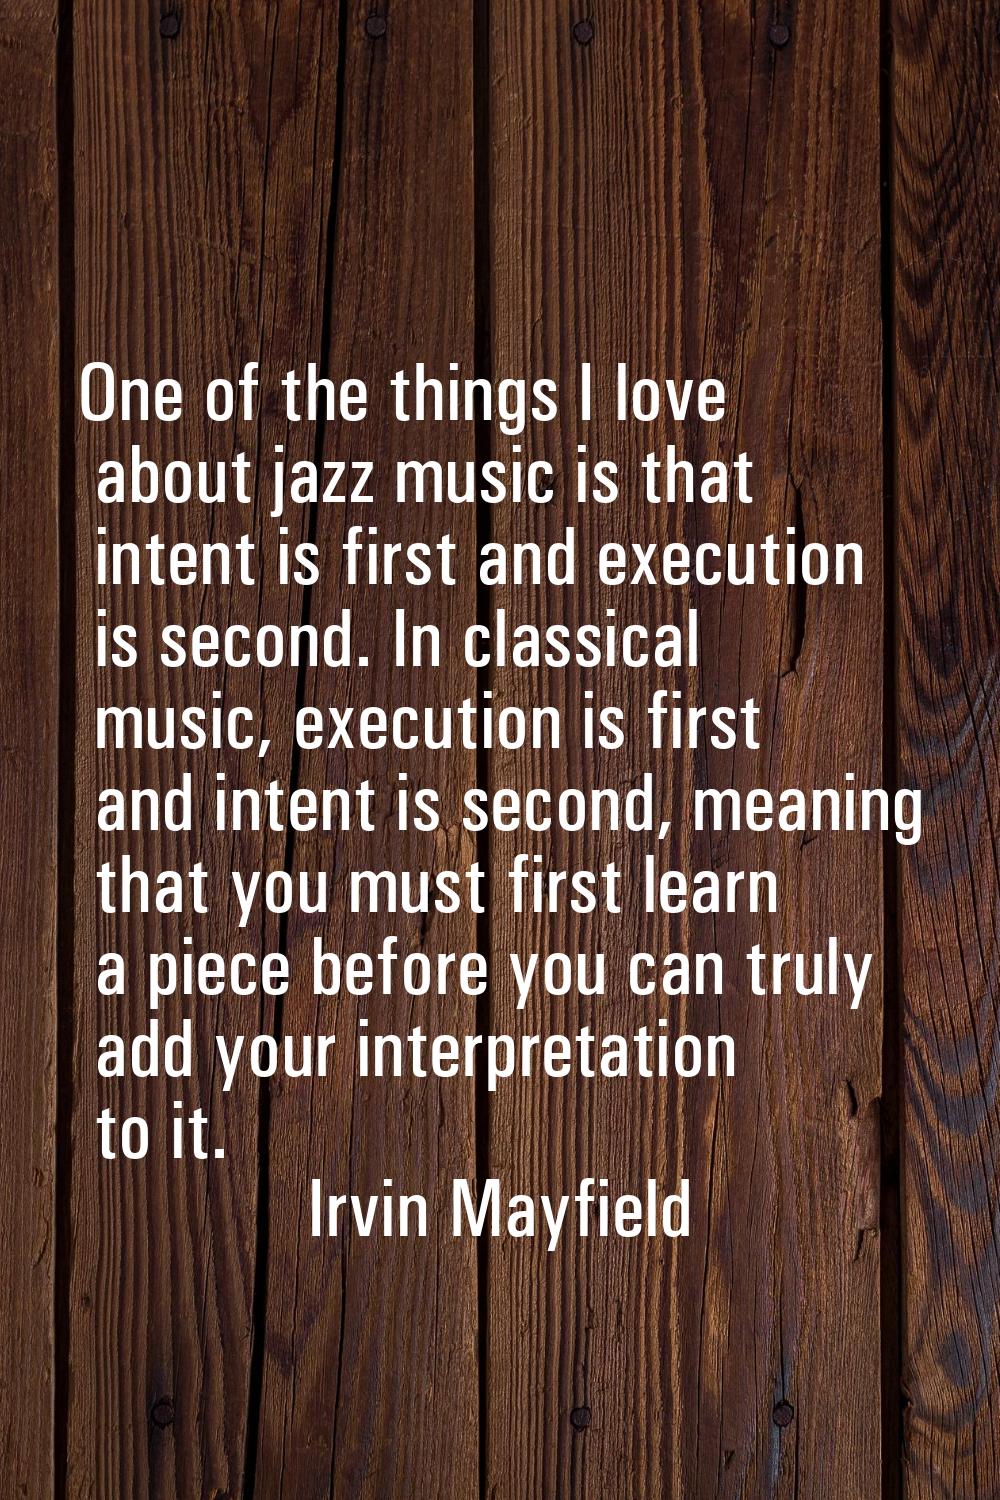 One of the things I love about jazz music is that intent is first and execution is second. In class